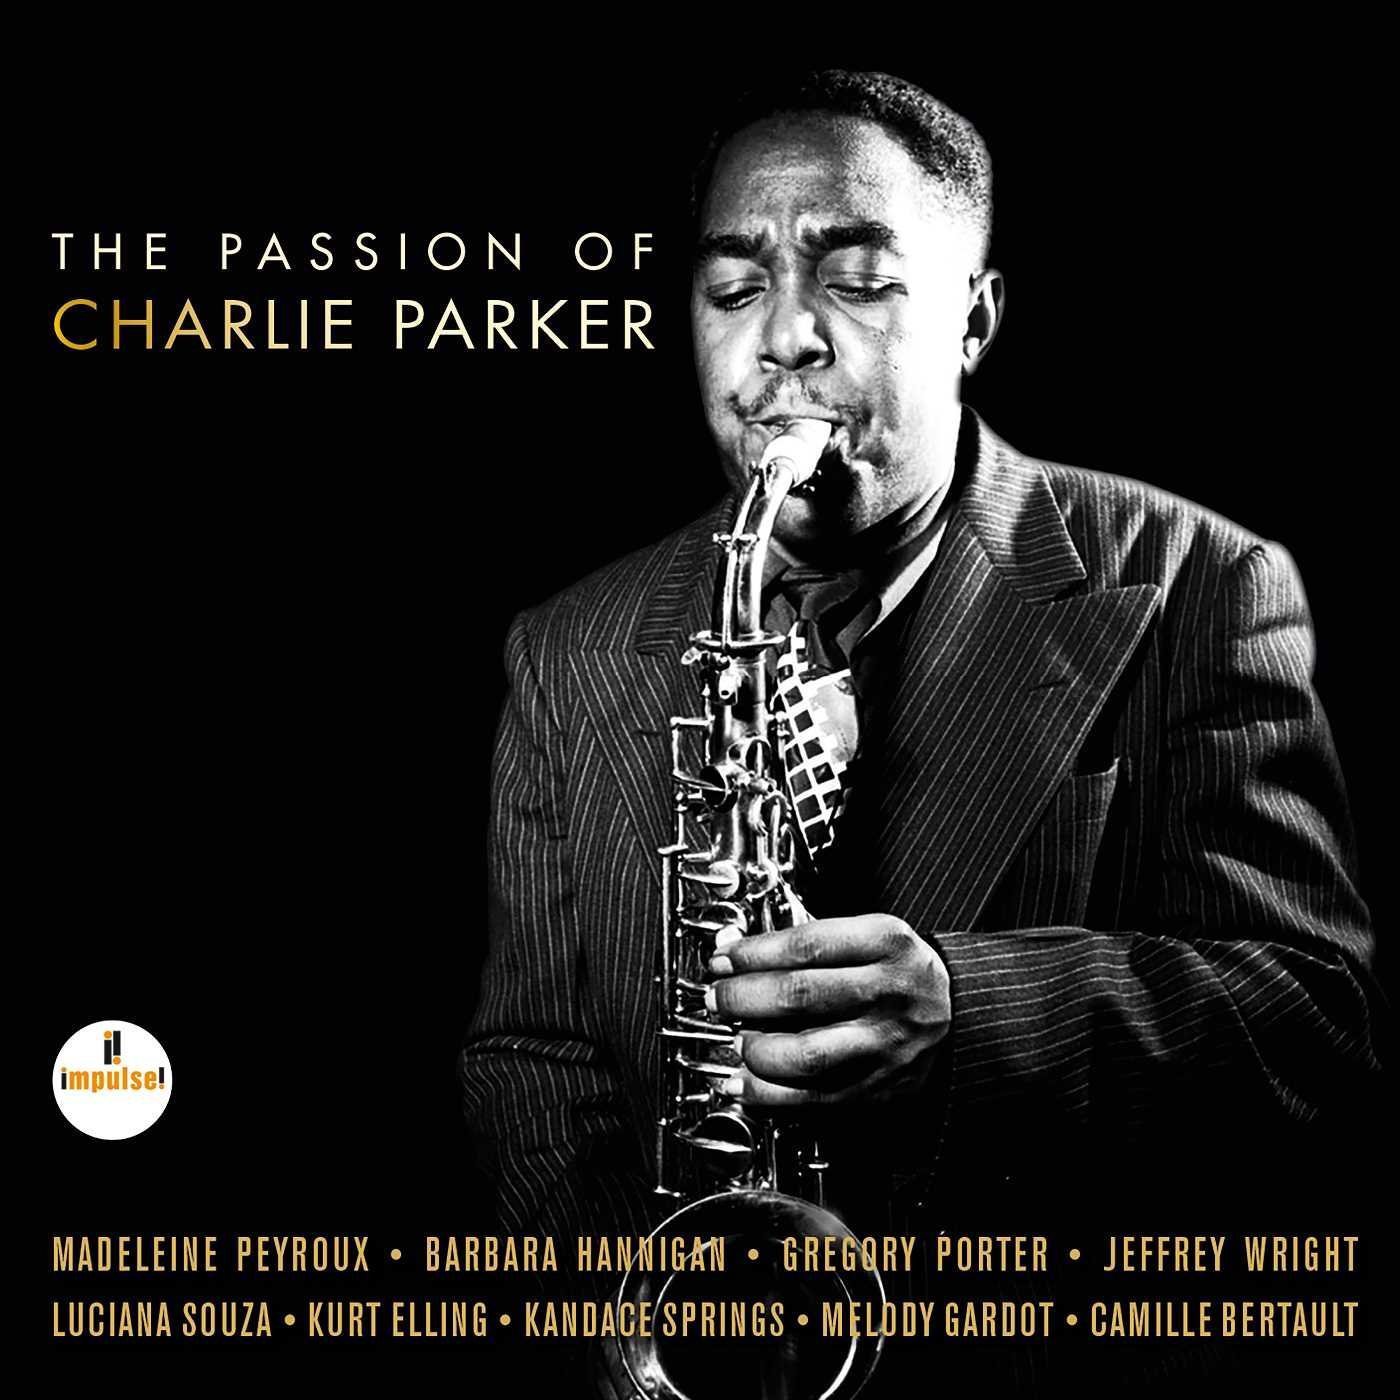 Various Artists - The Passion Of Charlie Parker (2017)  [HDTracks FLAC 24bit/96kHz]